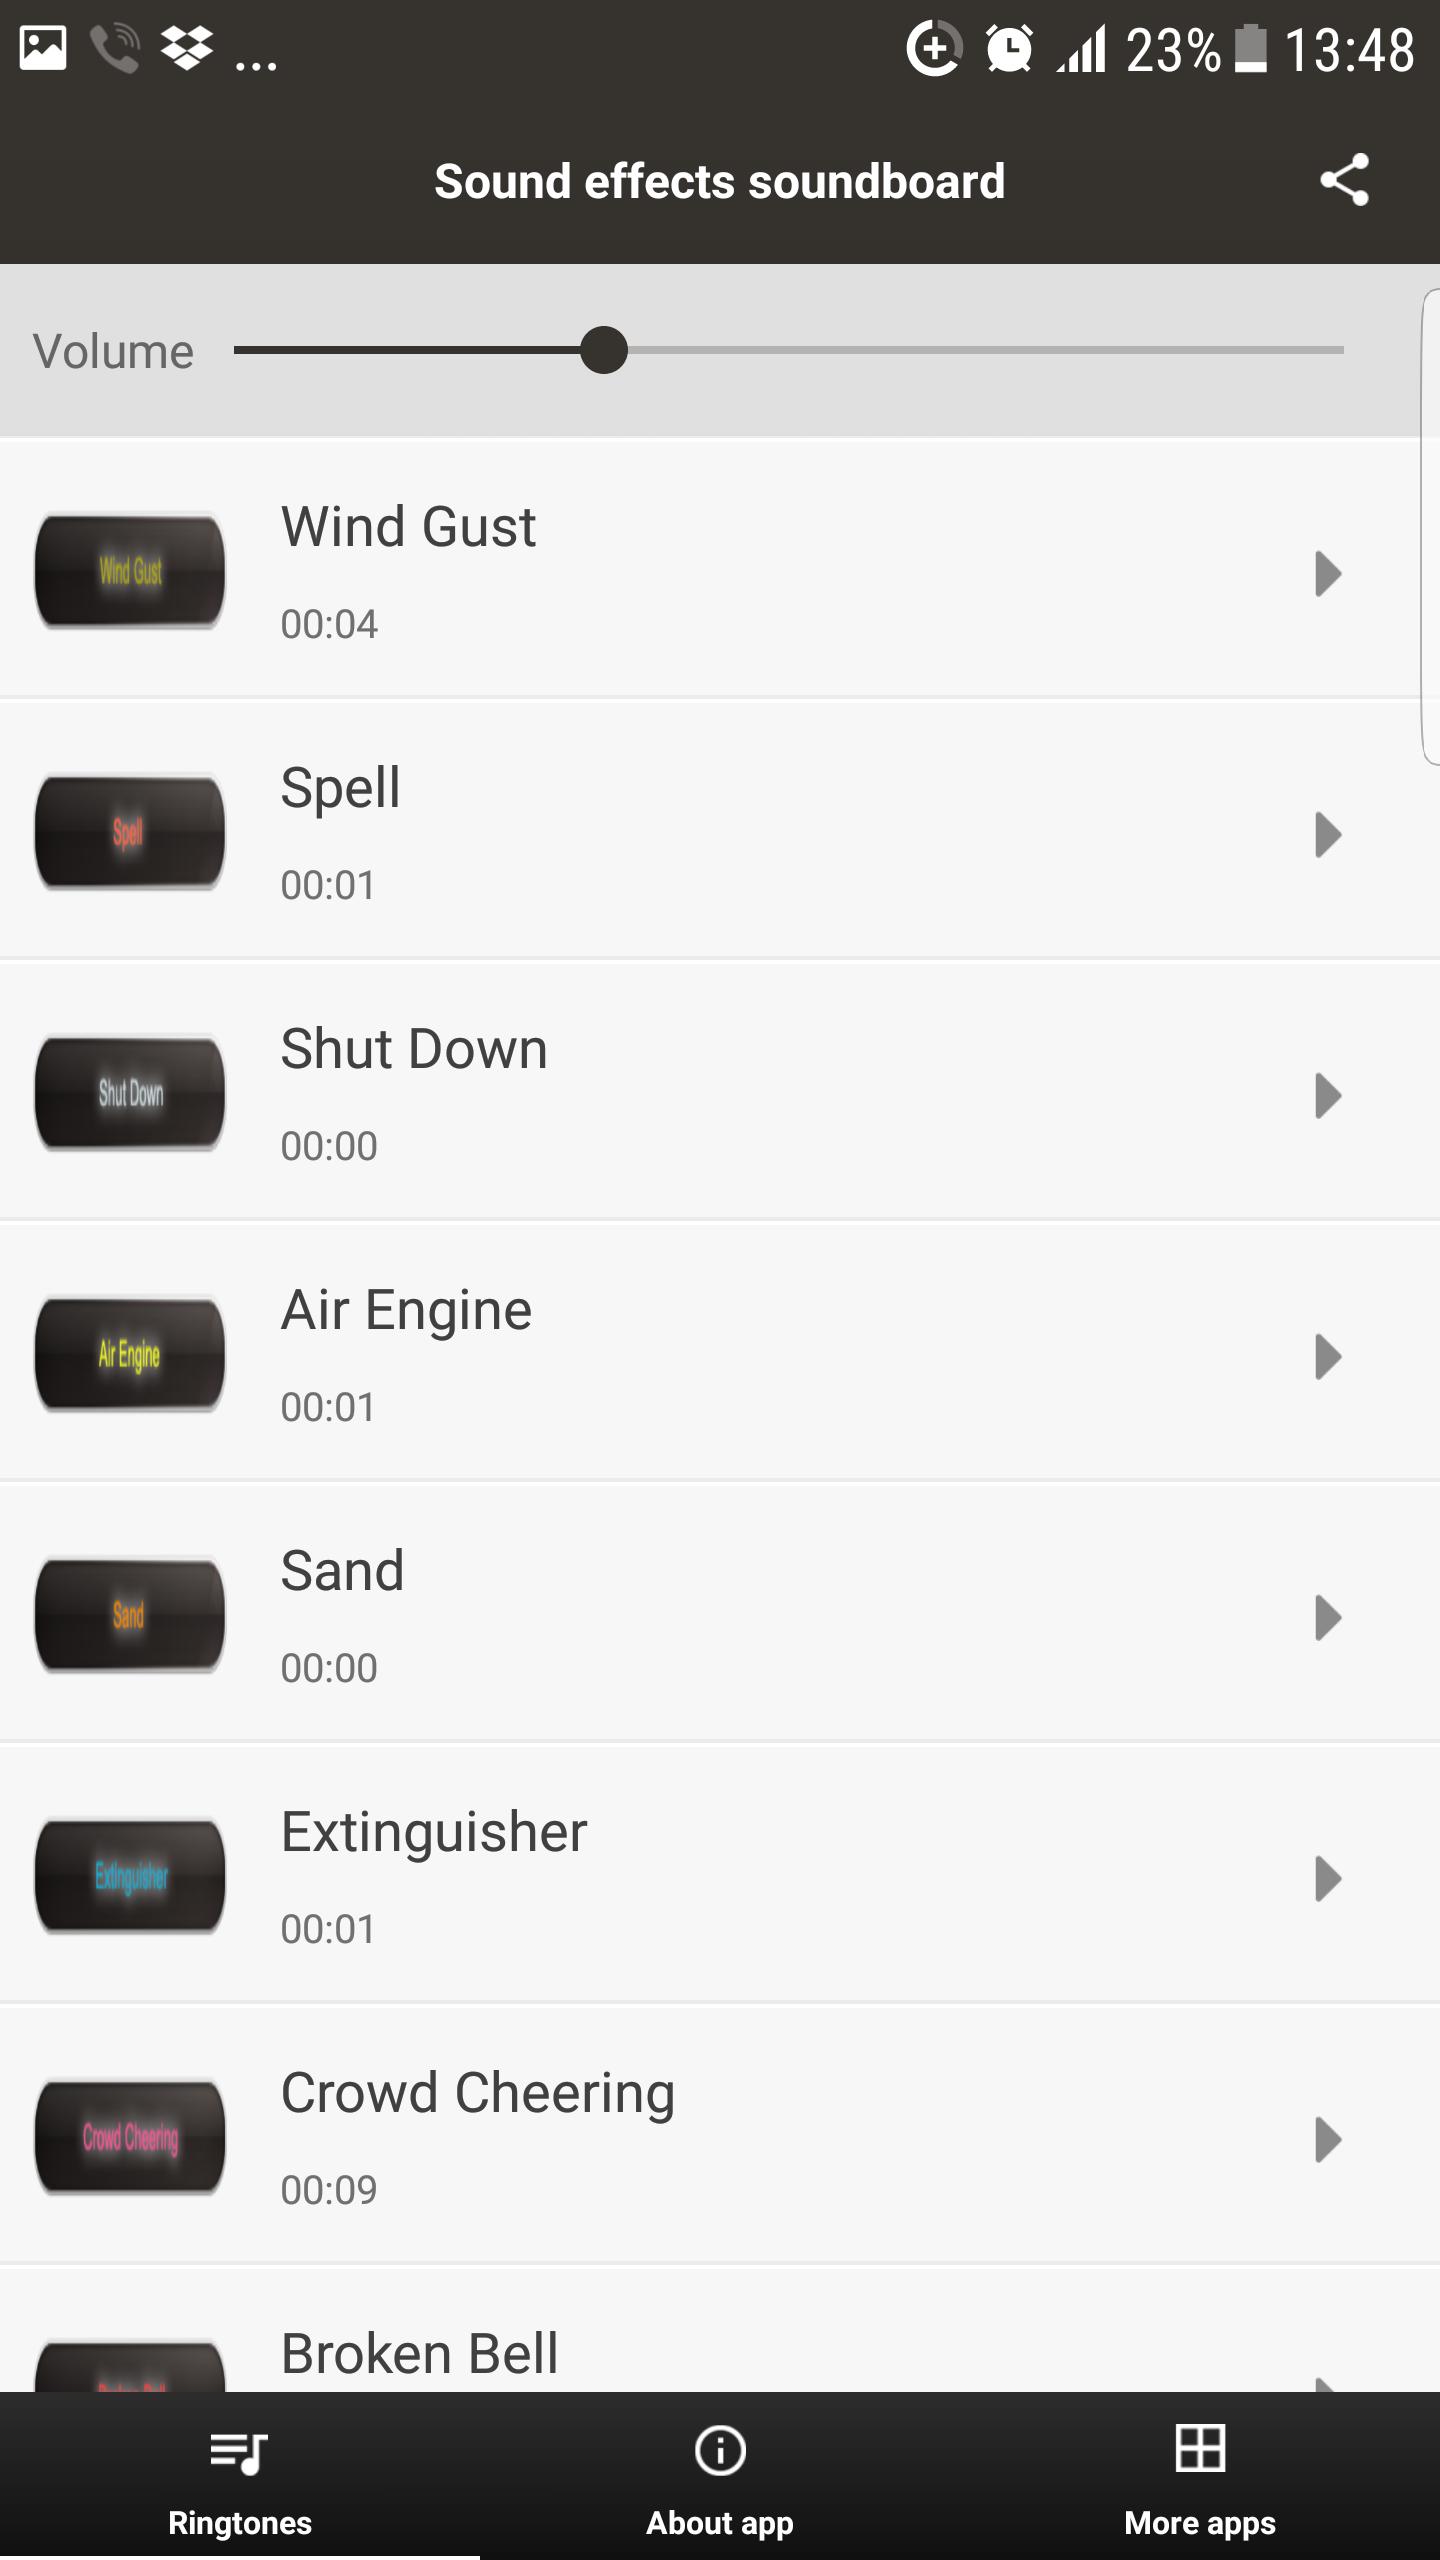 Sound Effects Soundboard for Android - APK Download